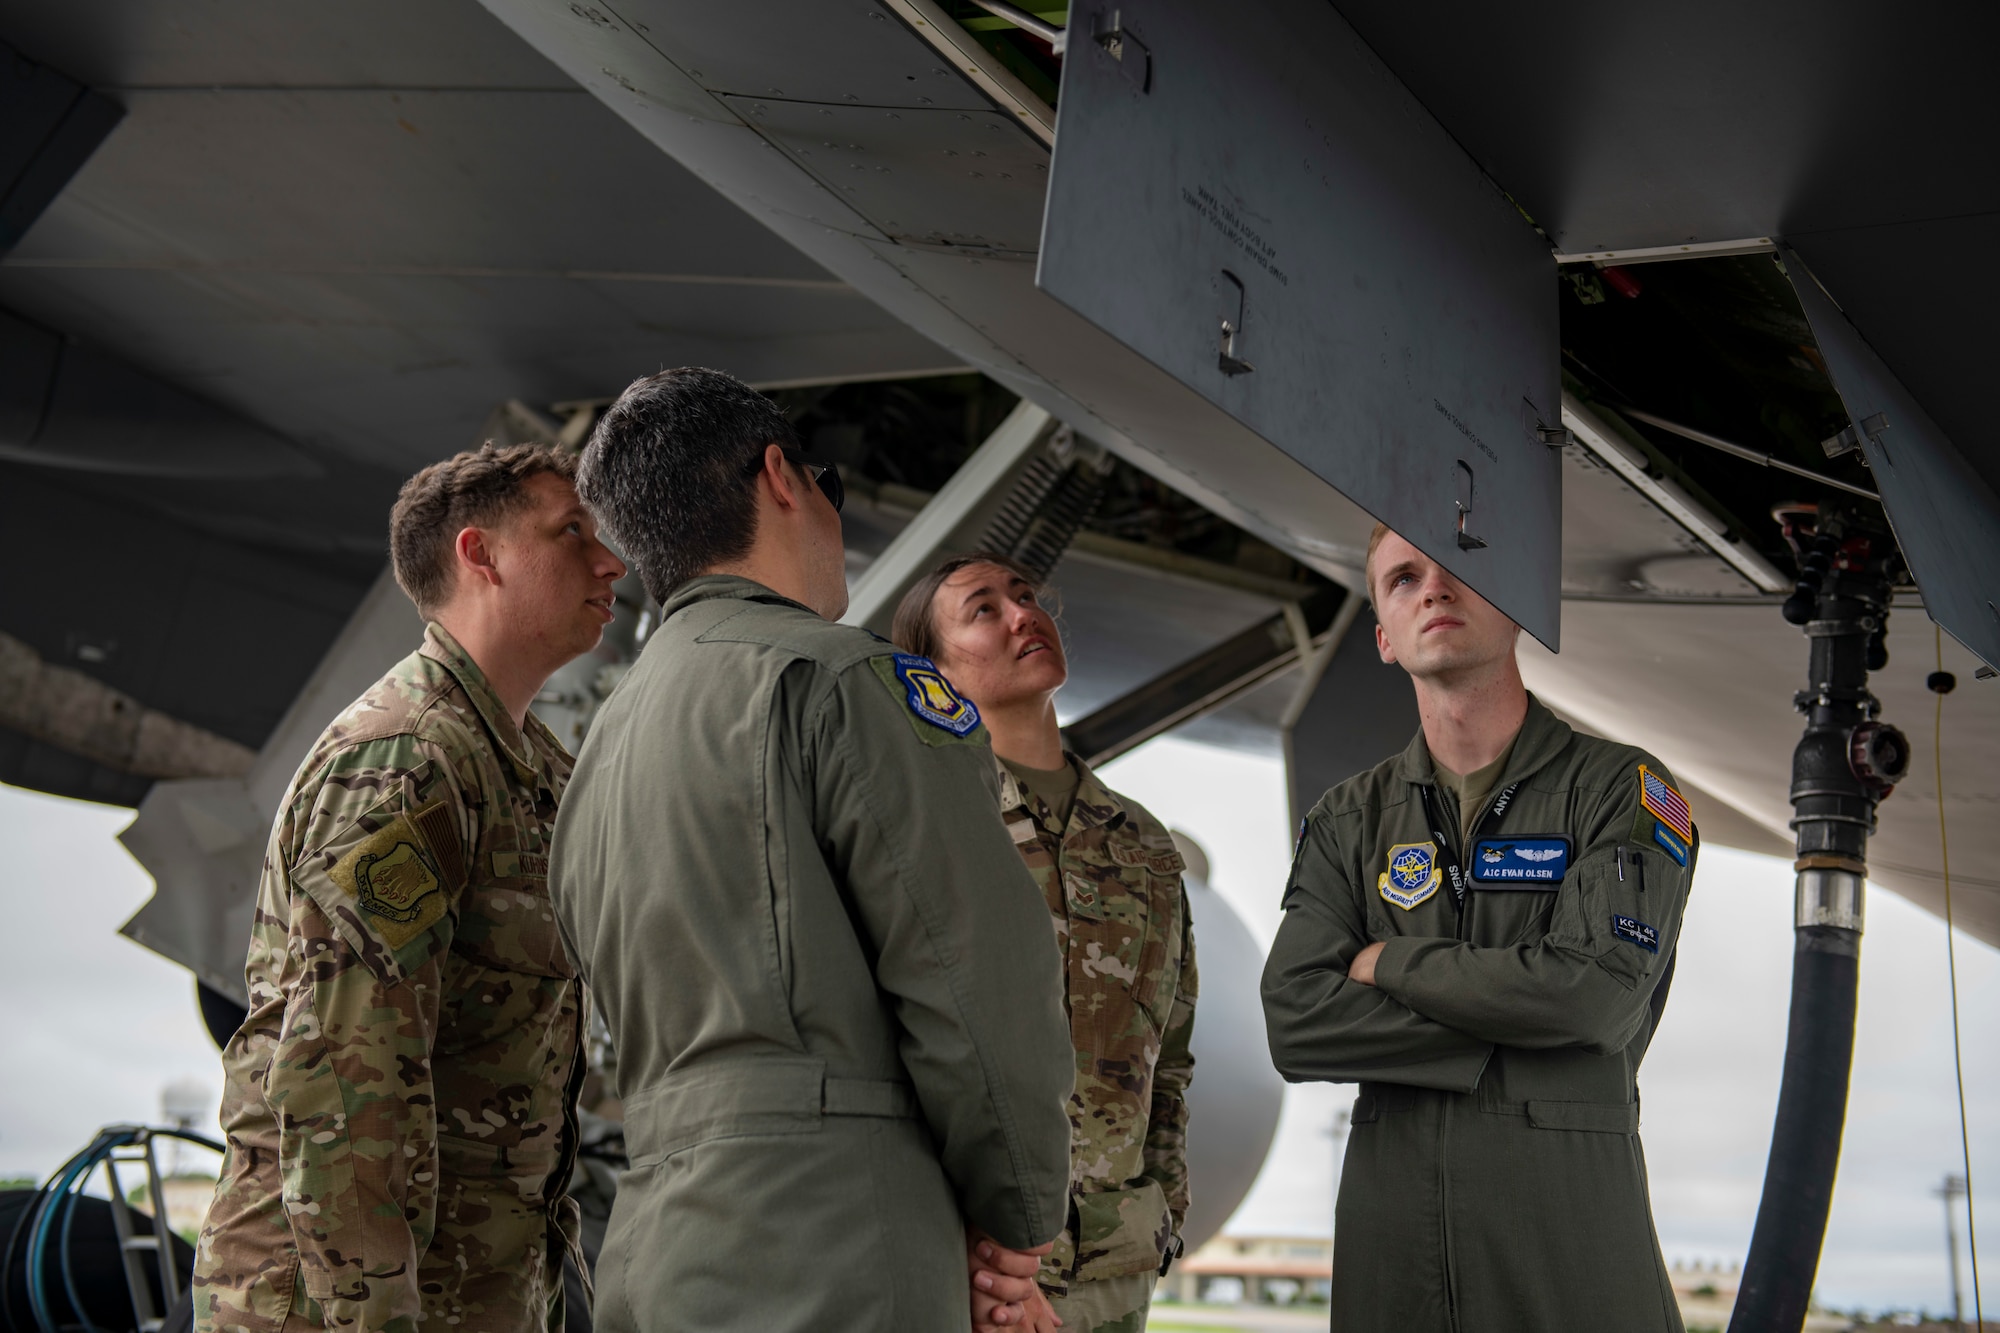 Air Force Airmen from the 18th Logistics Readiness Squadron work alongside Airmen from McConnell Air Force Base’s Agile Combat Employment office to hot pit refuel a KC-46 Pegasus